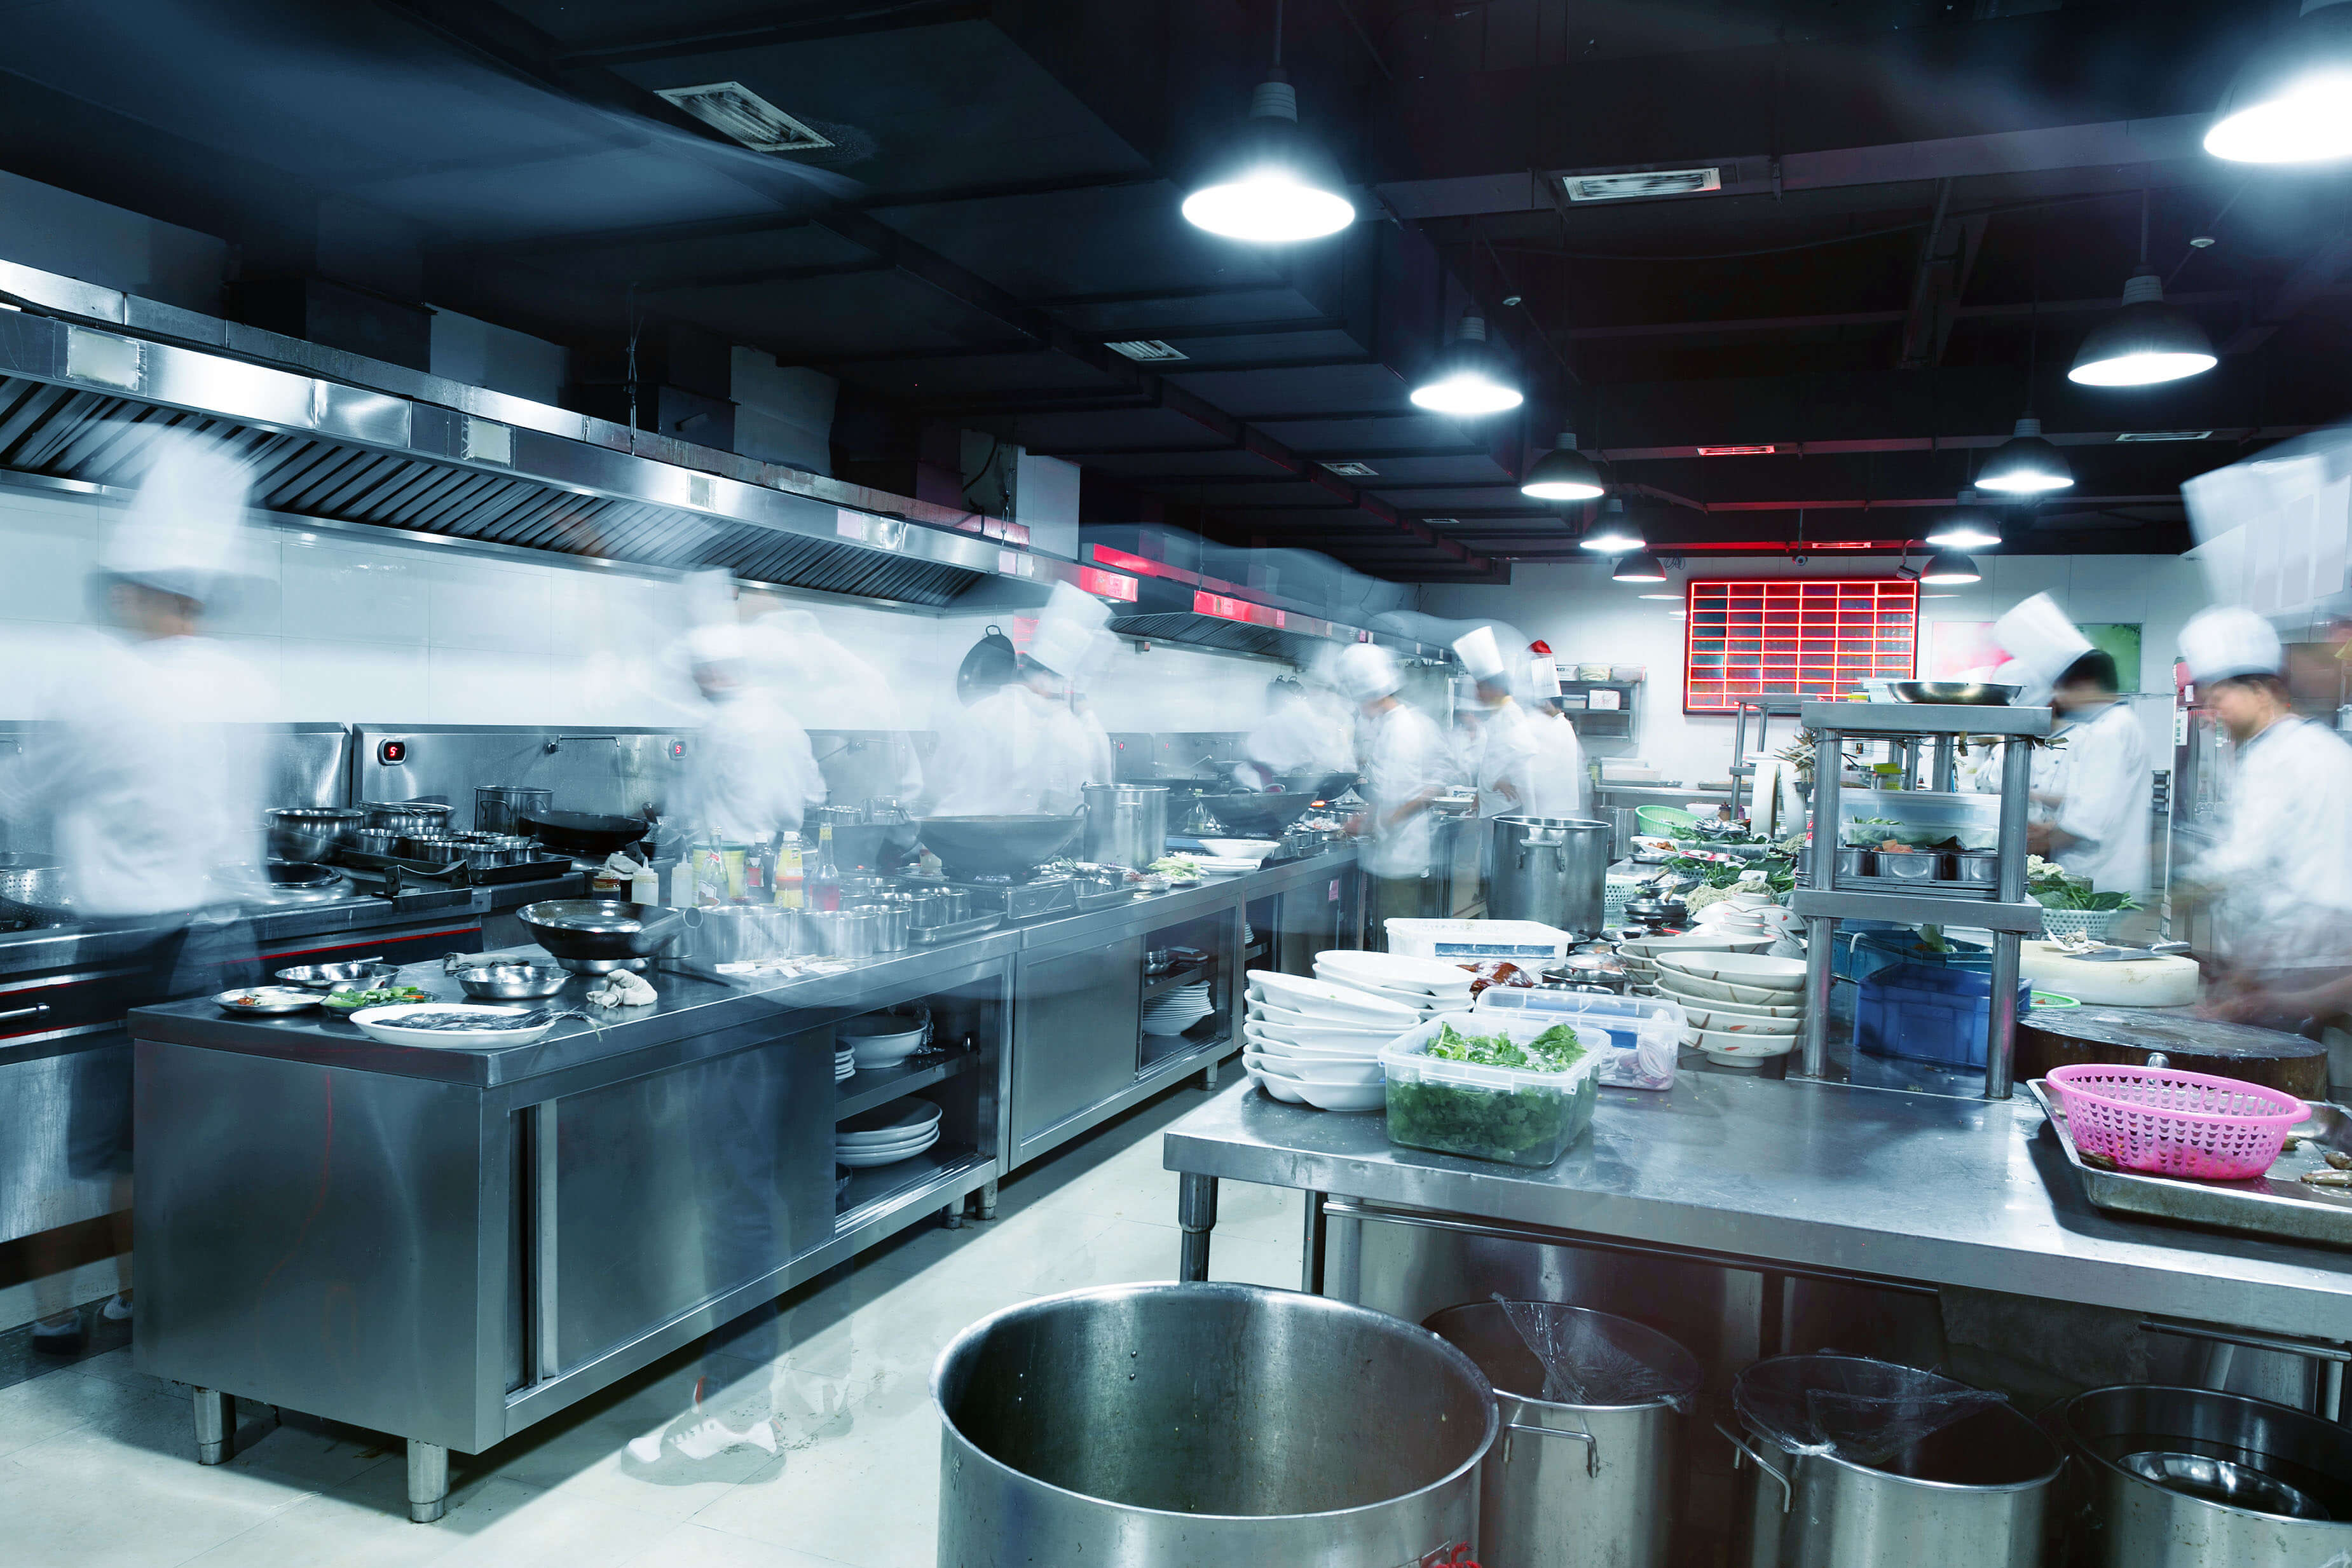 Bespoke Antimicrobial Cladding Products For The Hospitality Industry